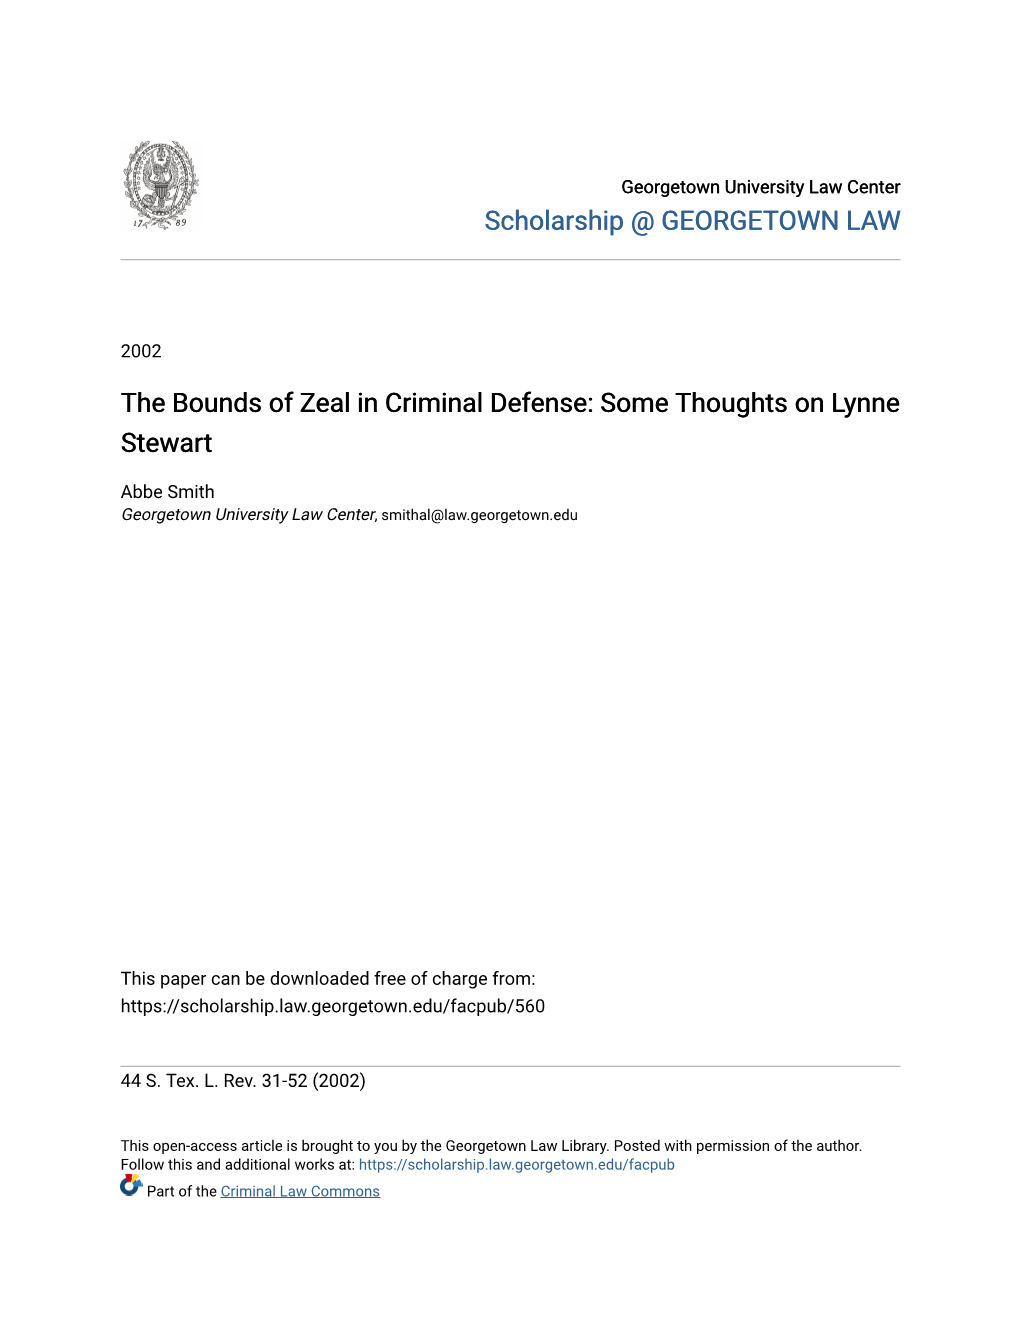 The Bounds of Zeal in Criminal Defense: Some Thoughts on Lynne Stewart